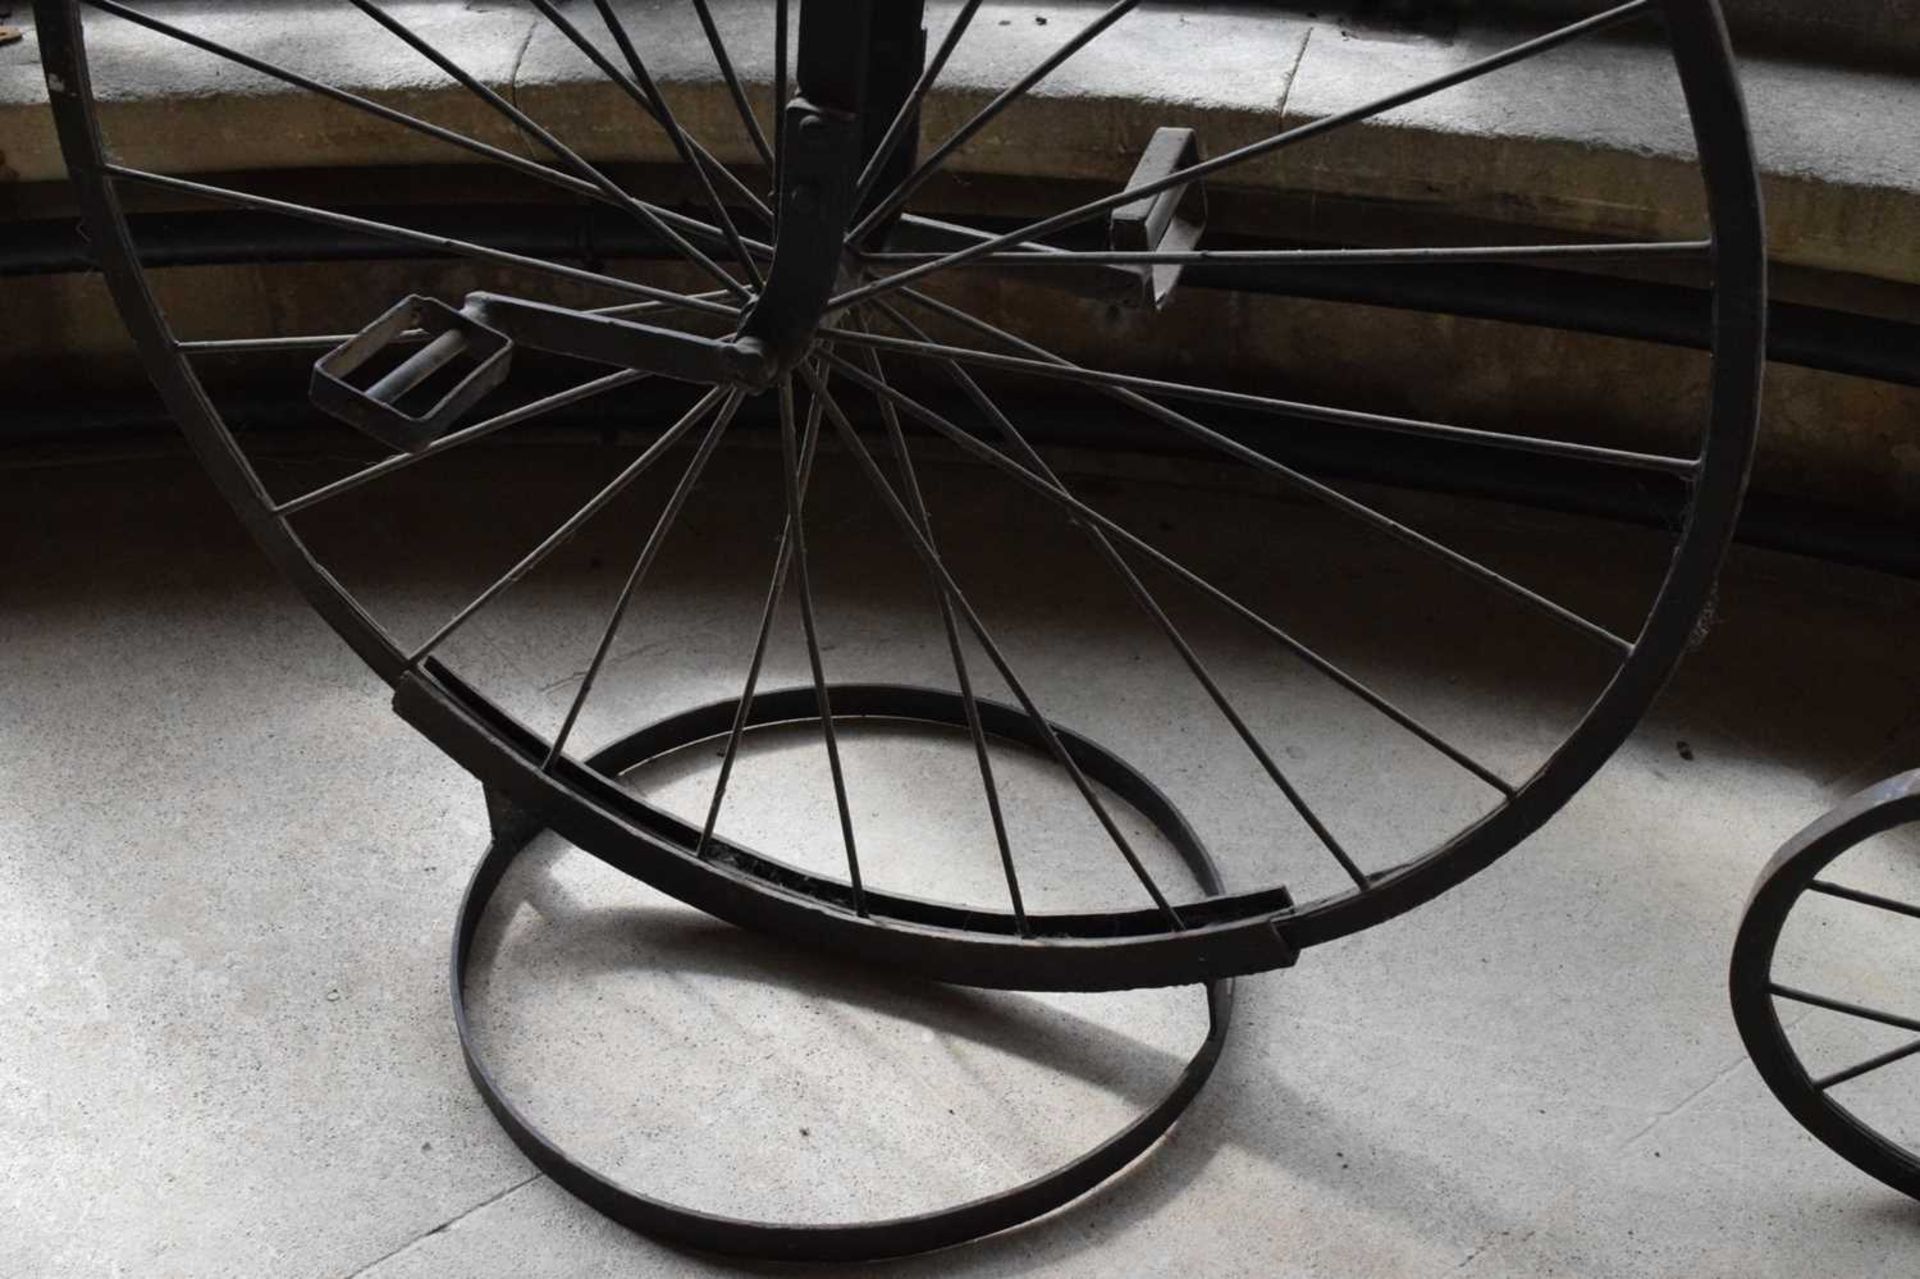 Replica penny farthing - Image 8 of 13